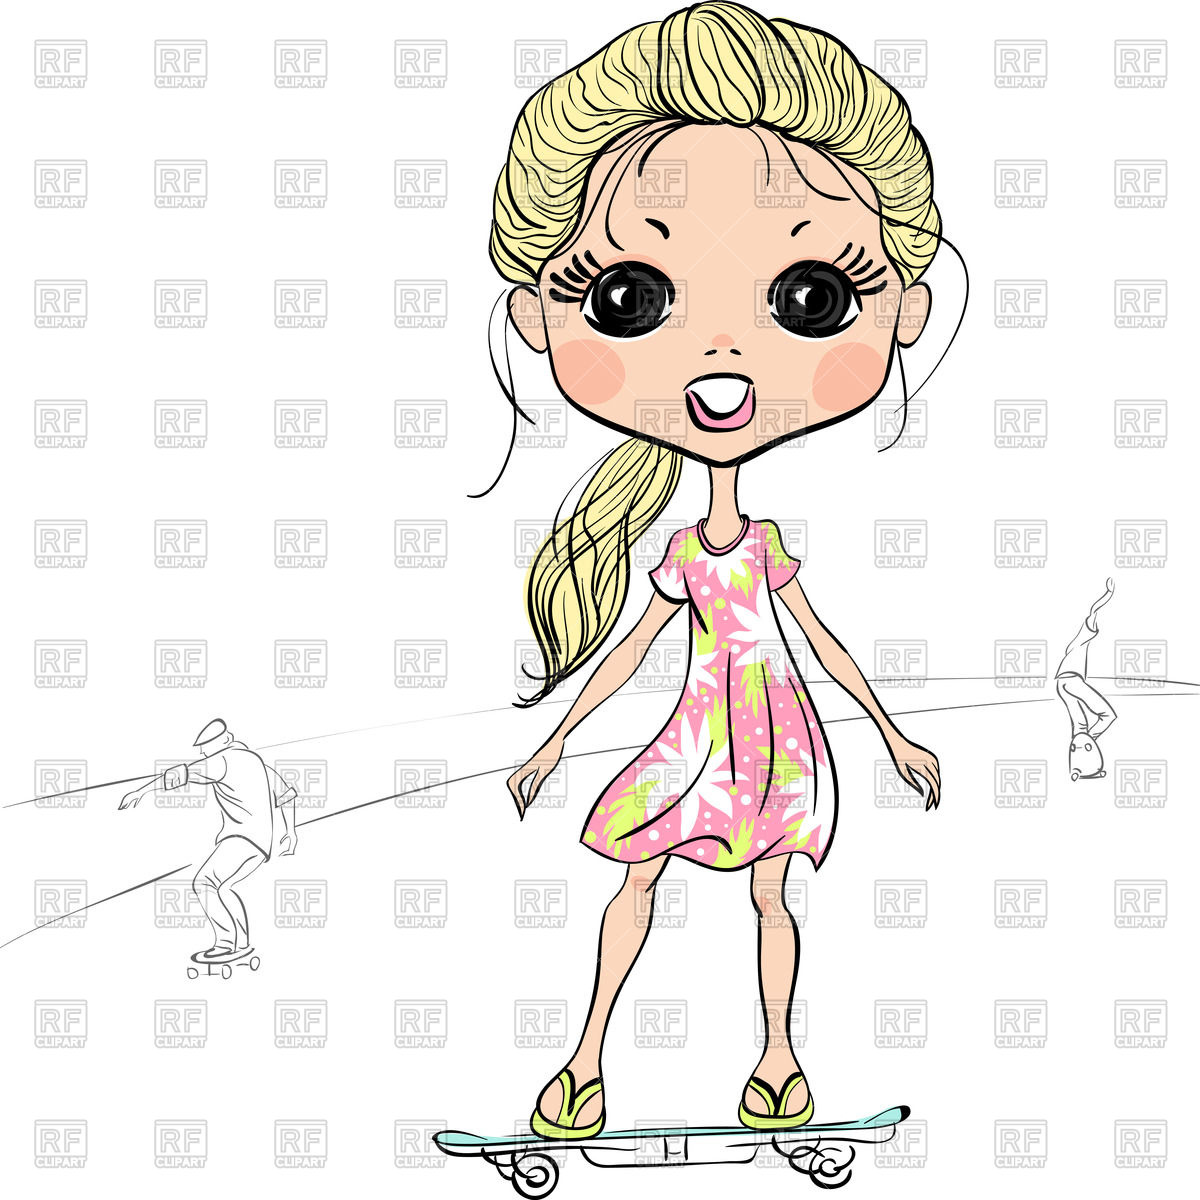     Girl Riding A Skateboard 43744 Download Royalty Free Vector Clipart